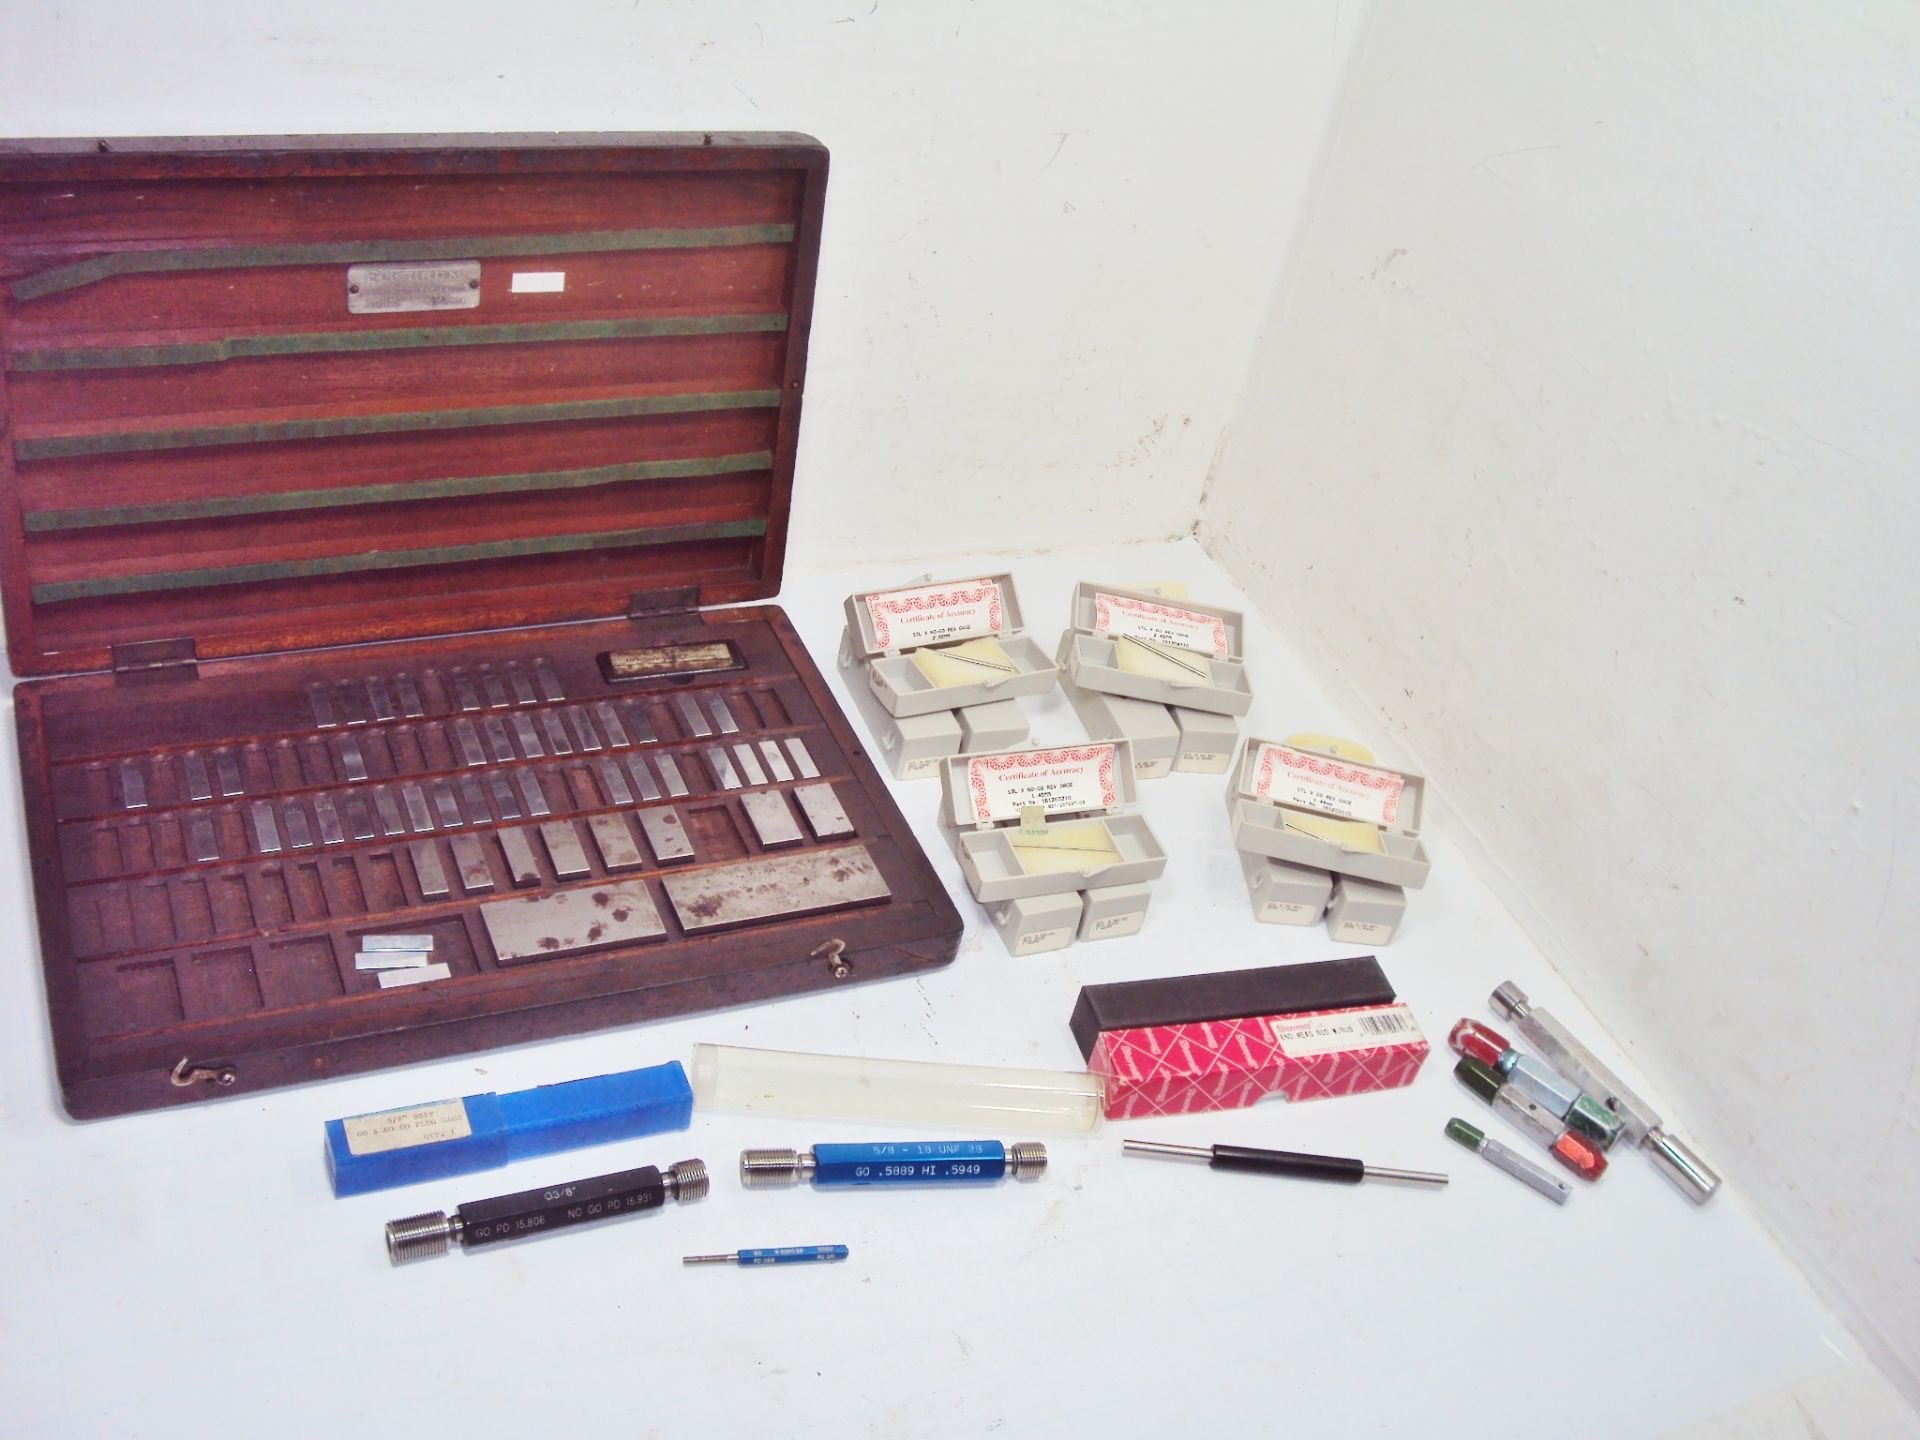 Assorted Gage Blocks, Gage Pins, Pin Holders & Thread Gages